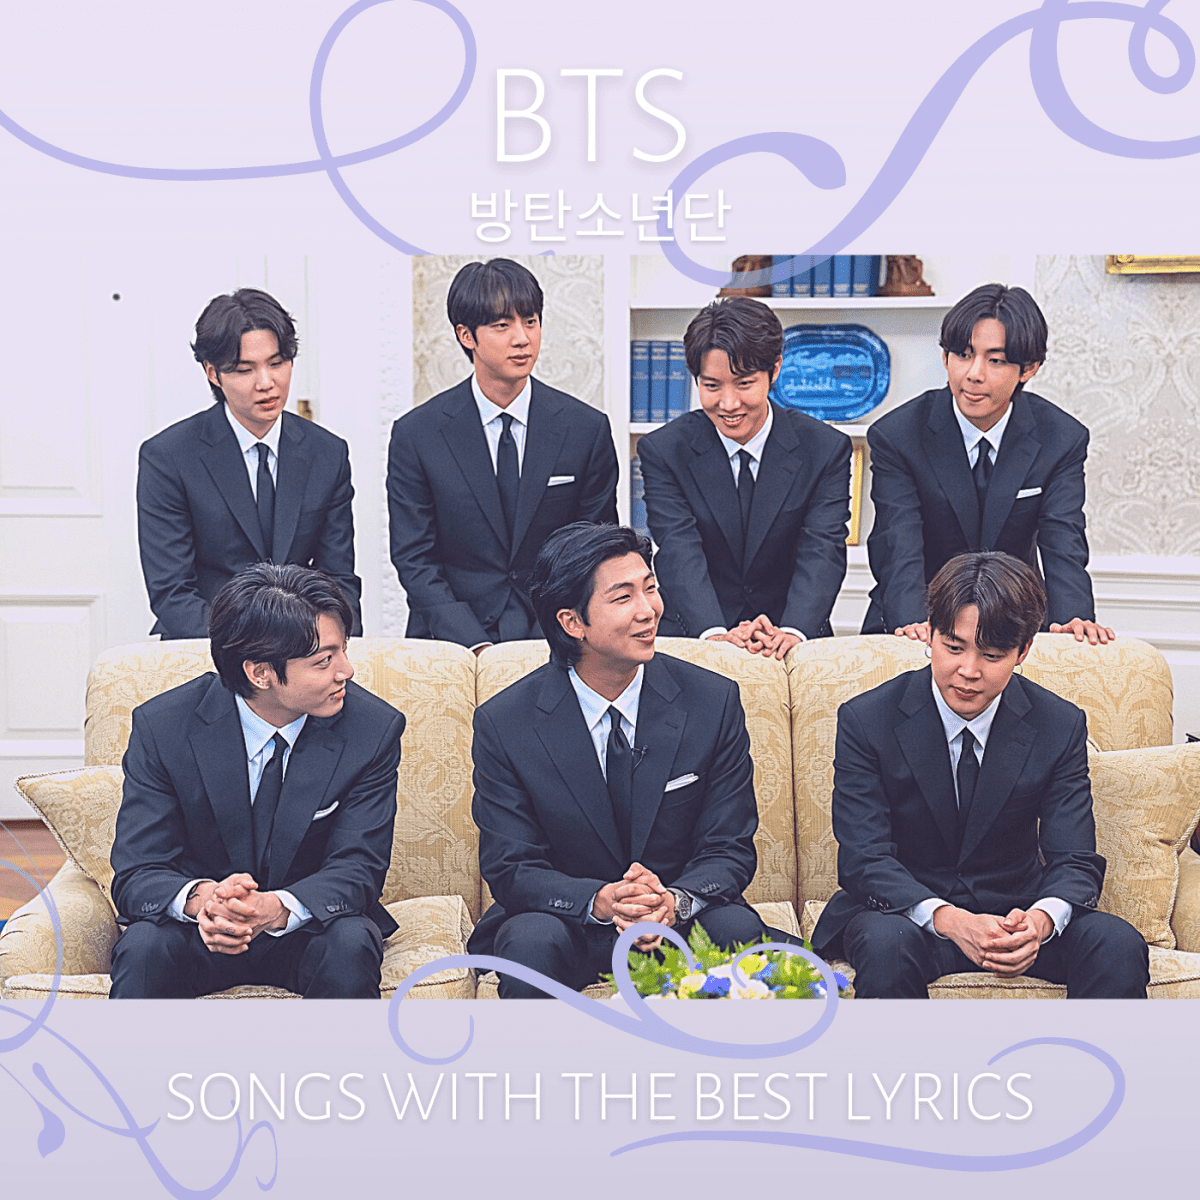 Top 10 BTS Songs With the Best Lyrics - Spinditty